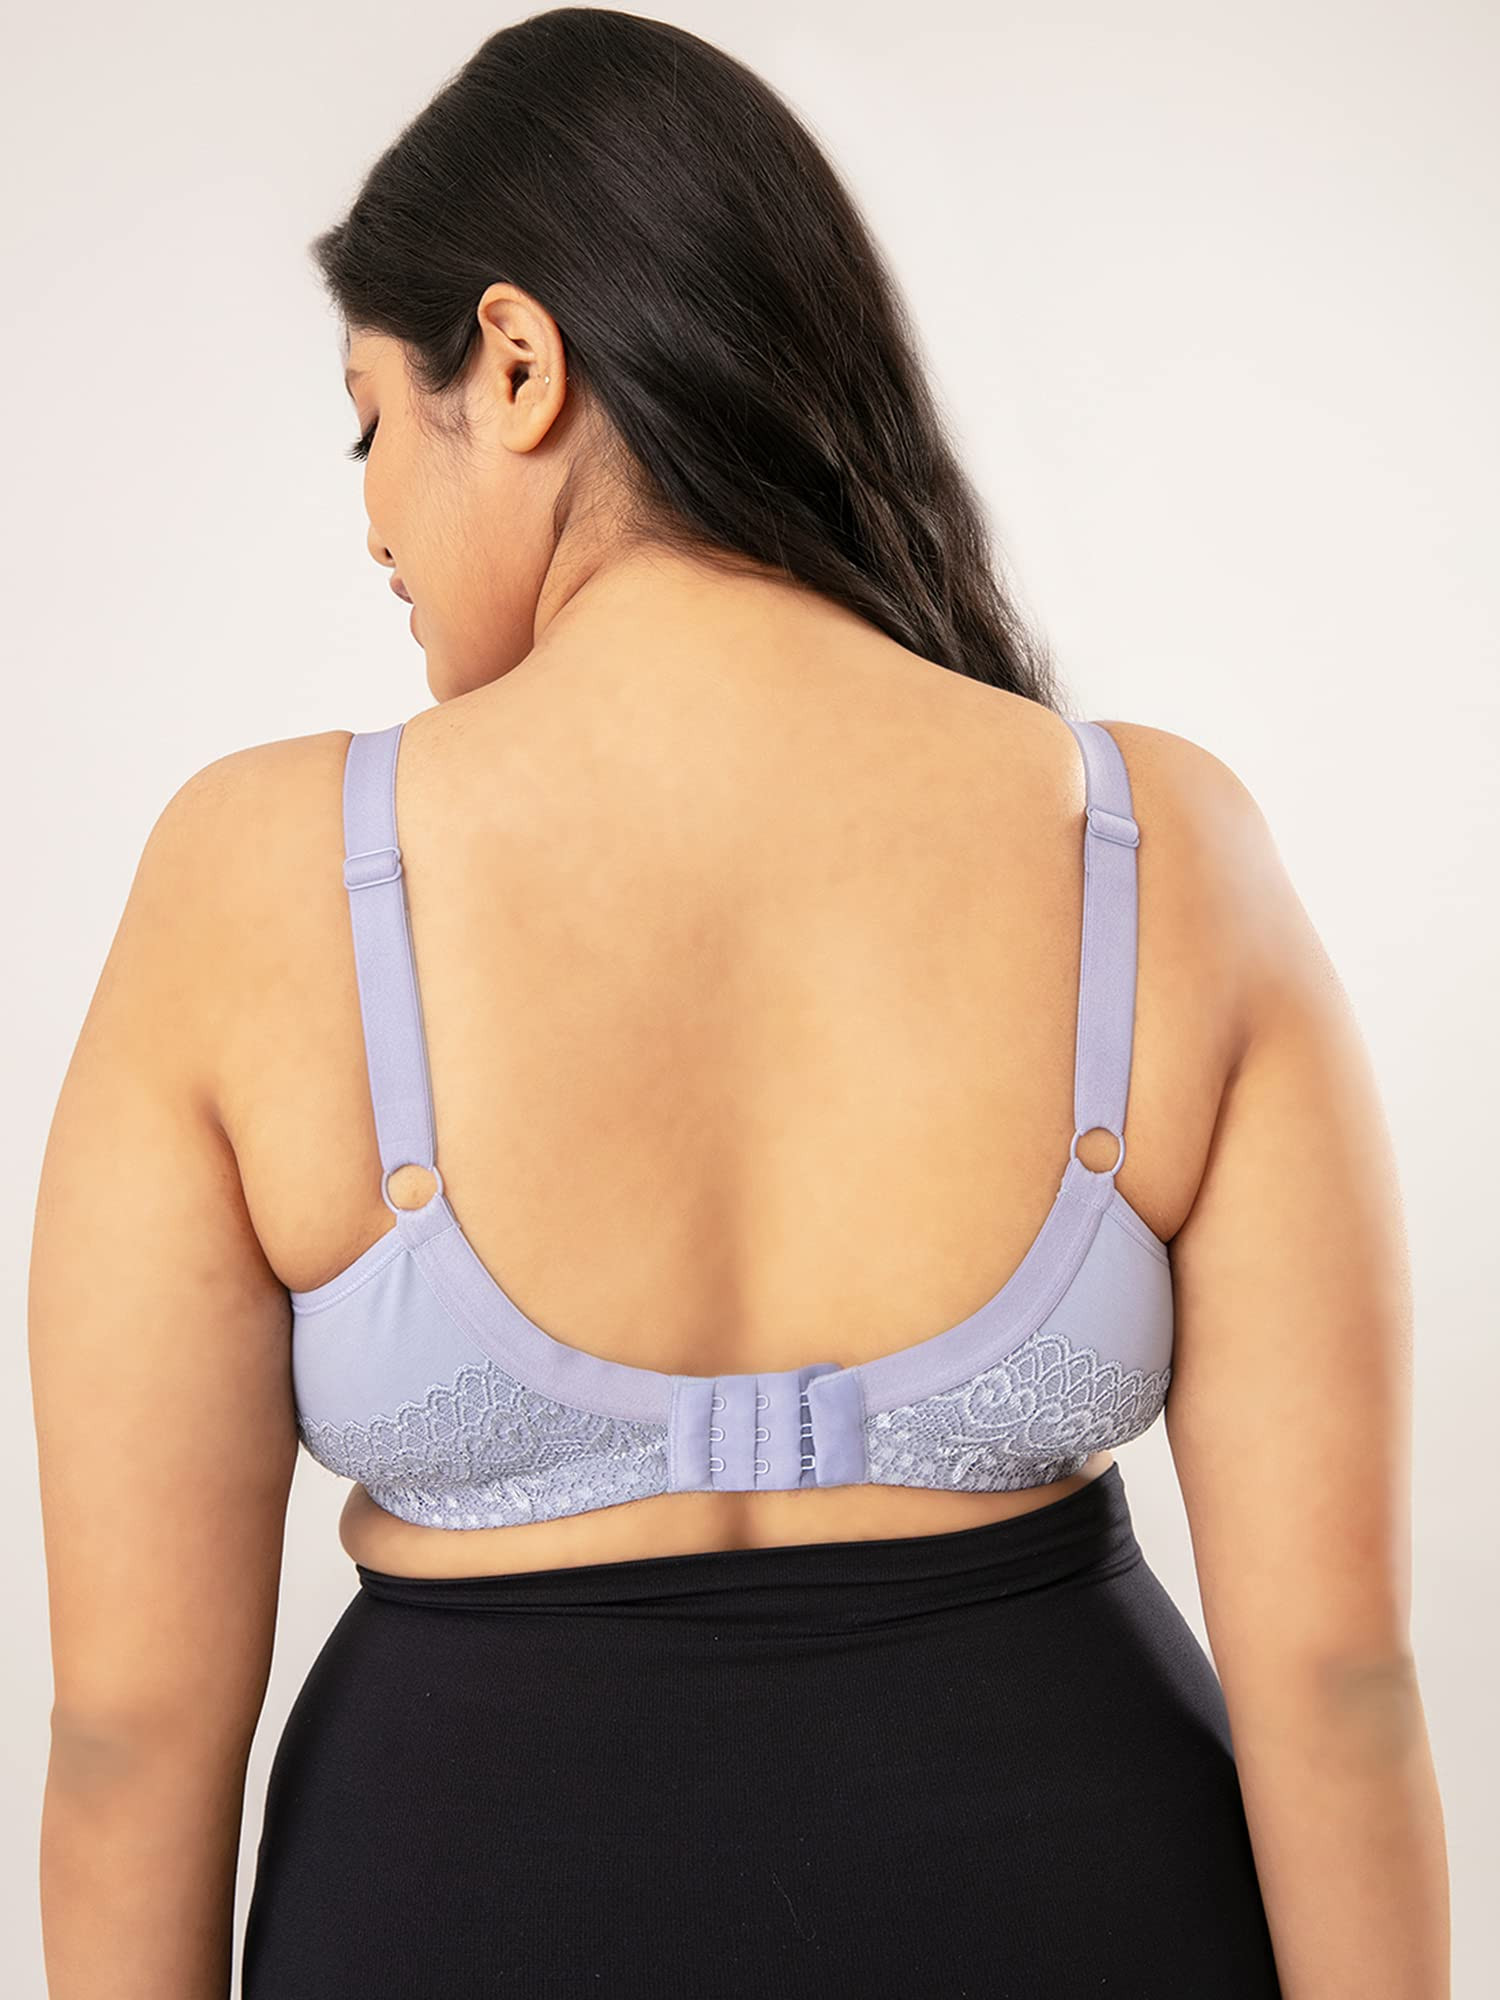 Buy NYKDby Nykaa Women's Full Support M-Frame Heavy Bust Everyday Cotton Bra, Non-Padded, Wireless, Full Coverage